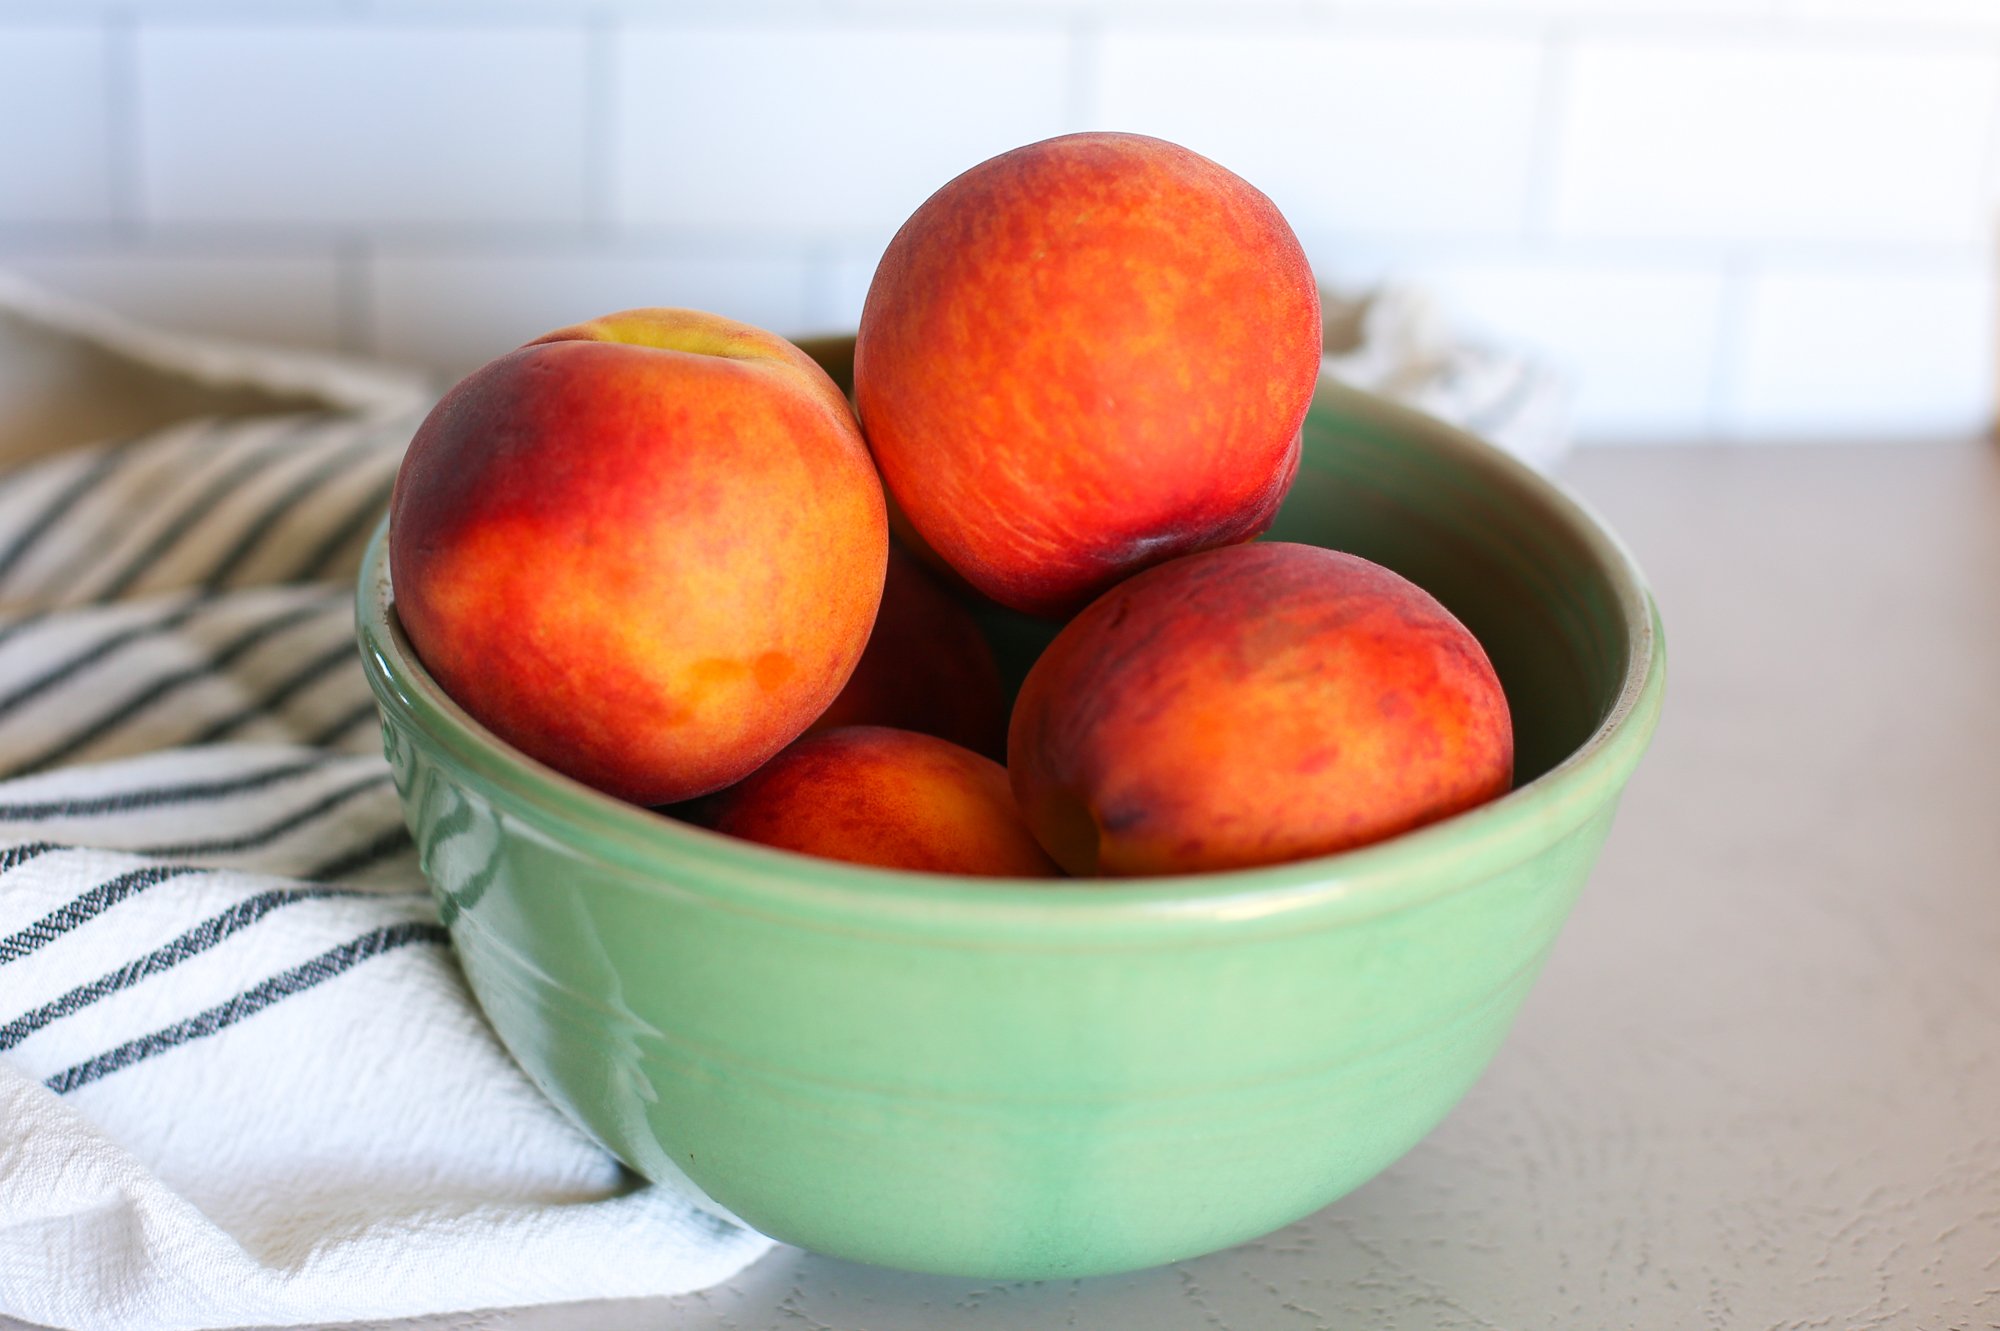 Fresh, whole peaches in a green bowl on a counter.